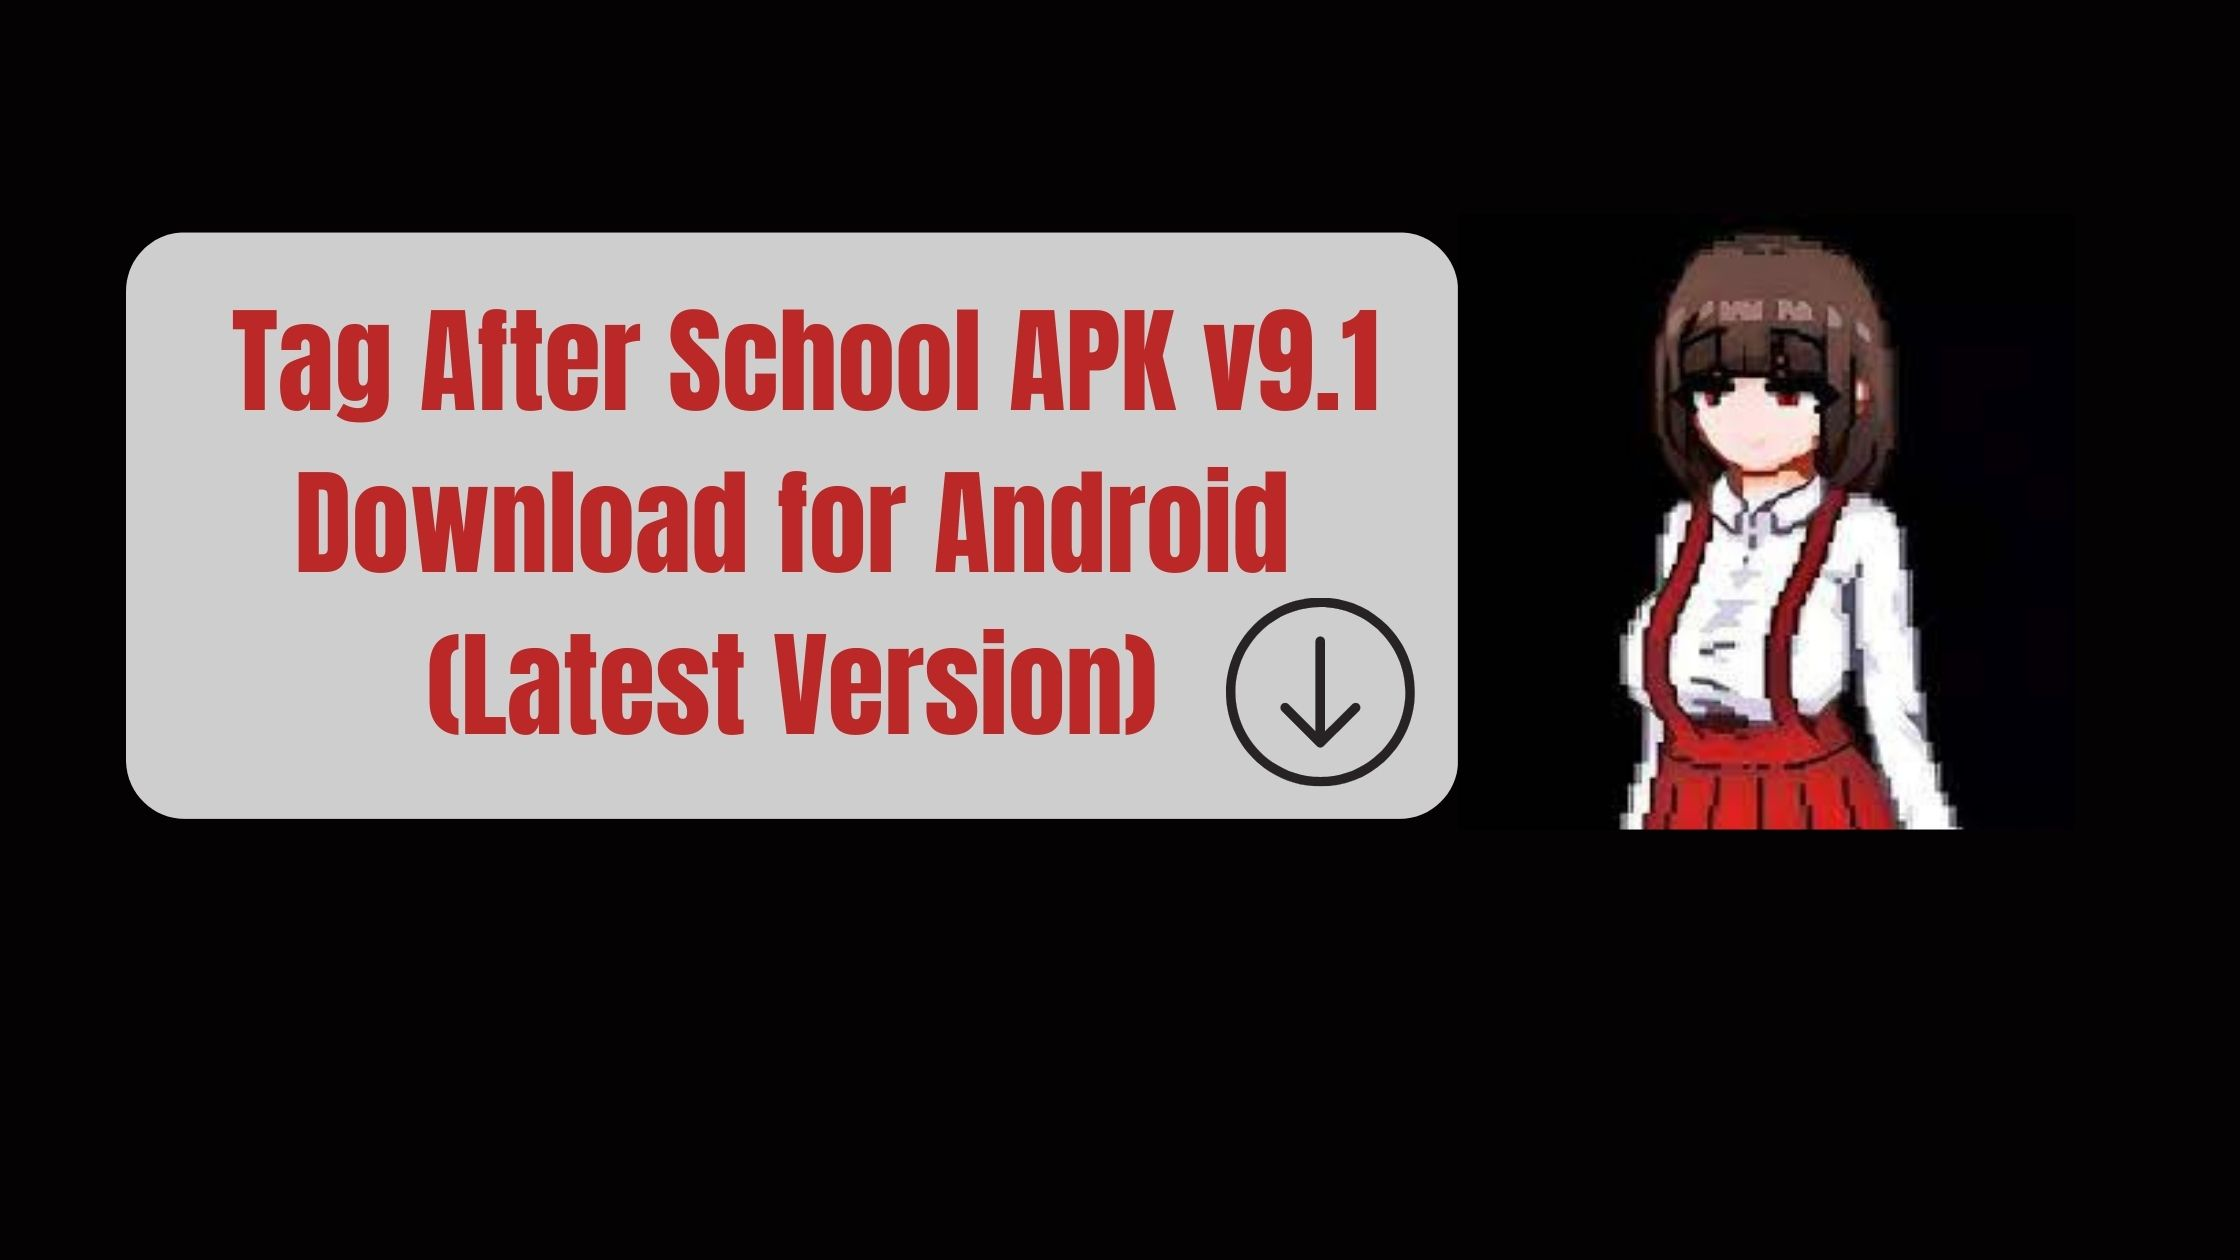 Tag After School APK v9.1 Download for Android (Latest Version)